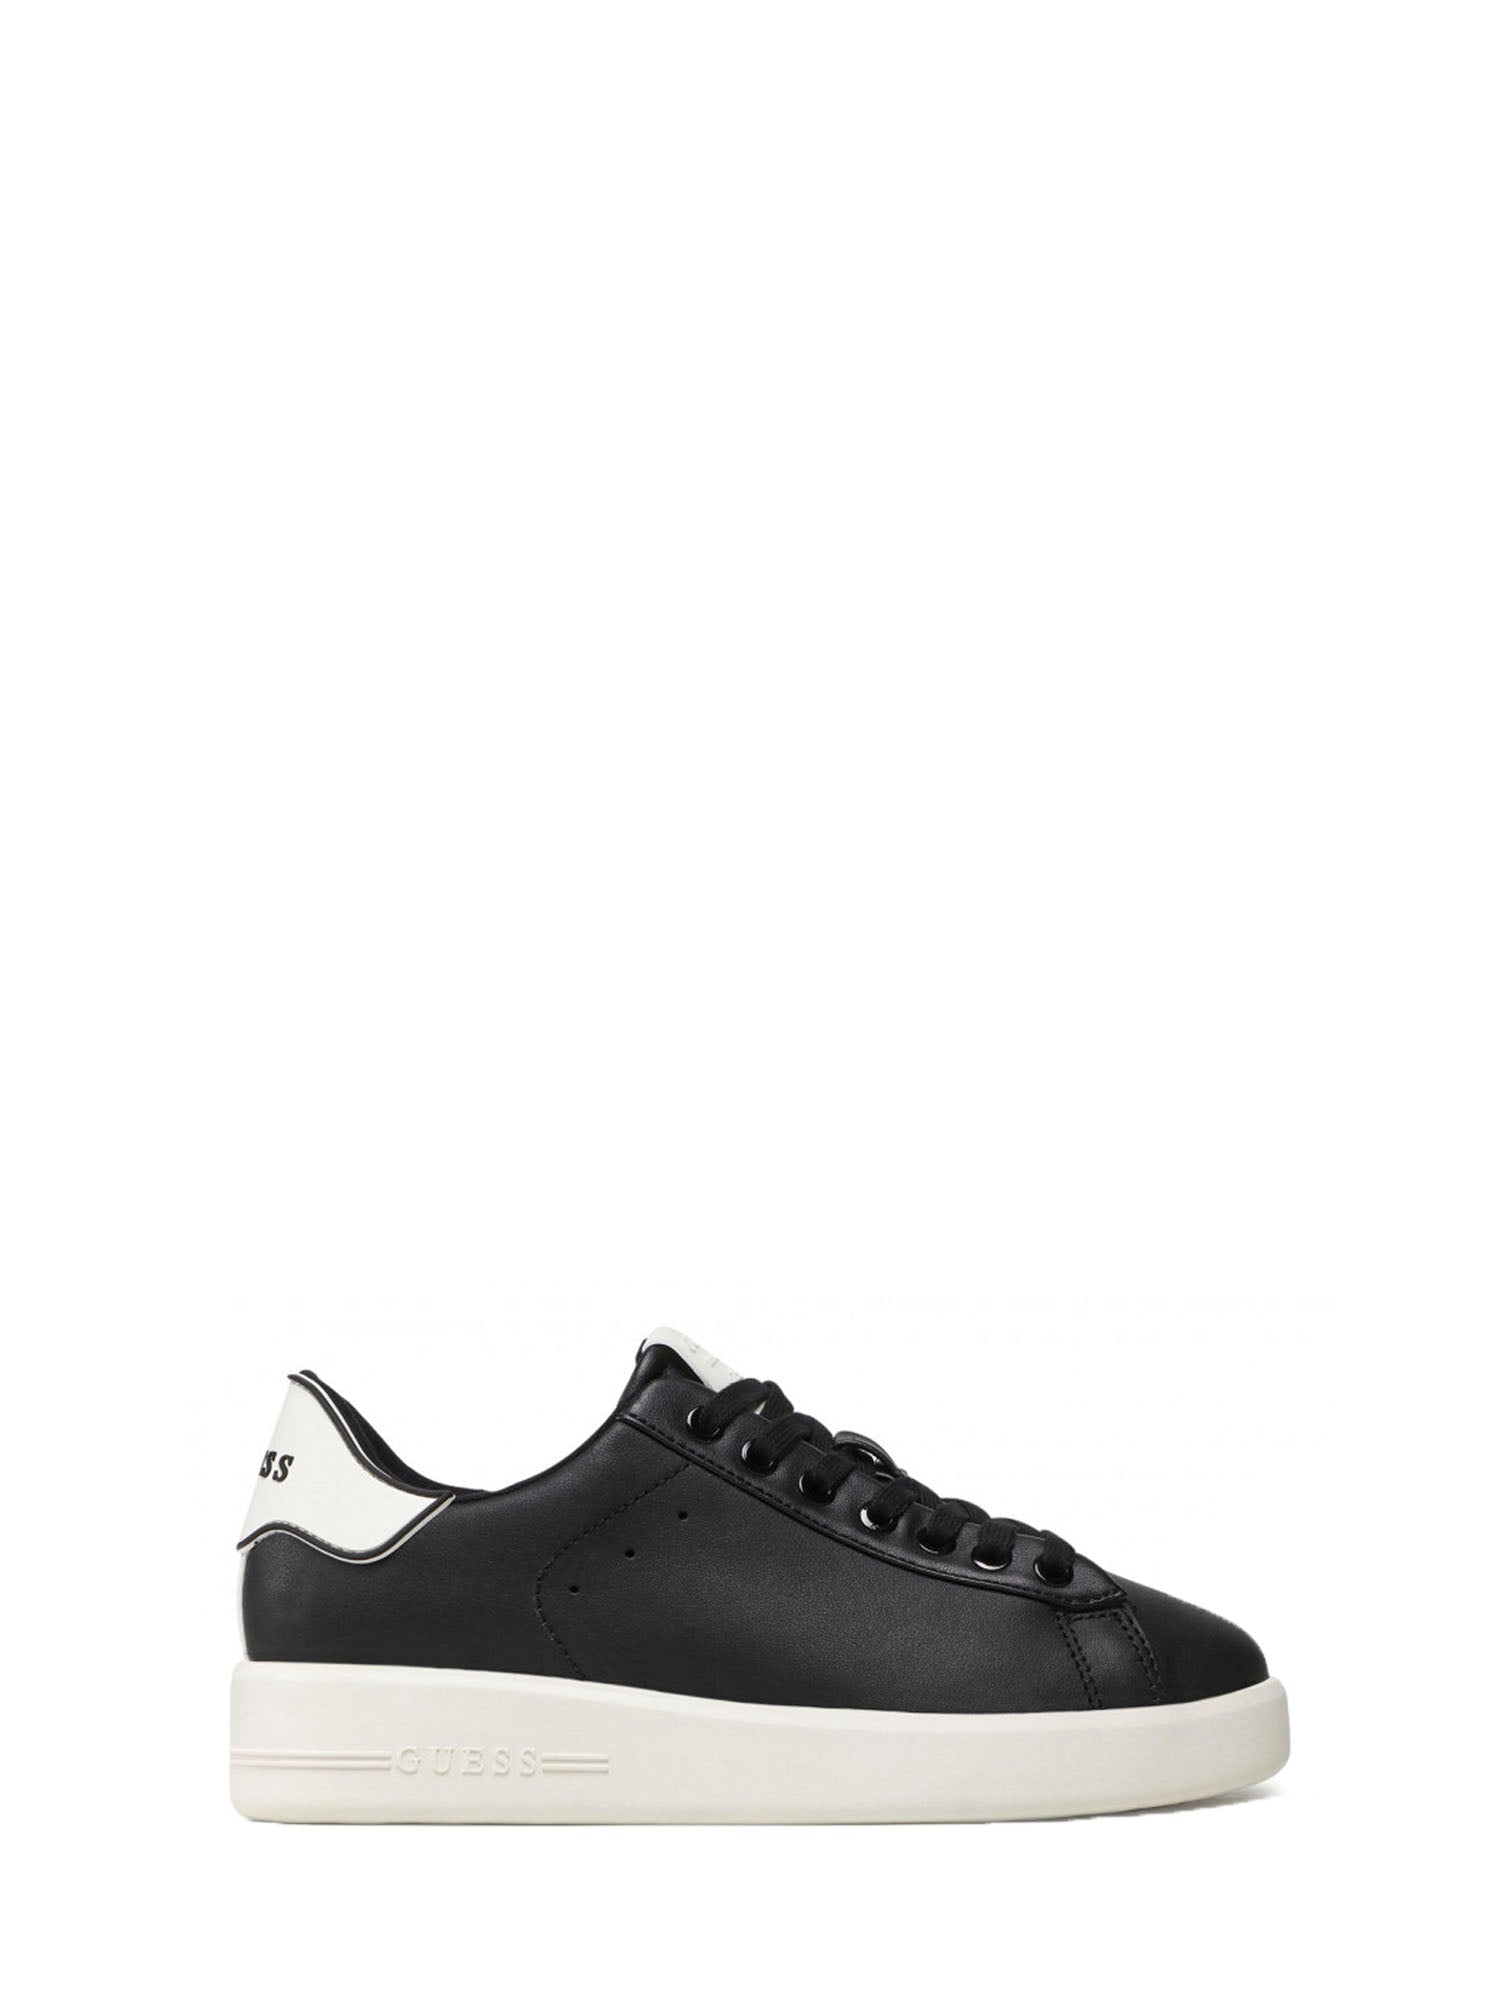 GUESS JEANS SNEAKERS ROCKIES NERO - BIANCO